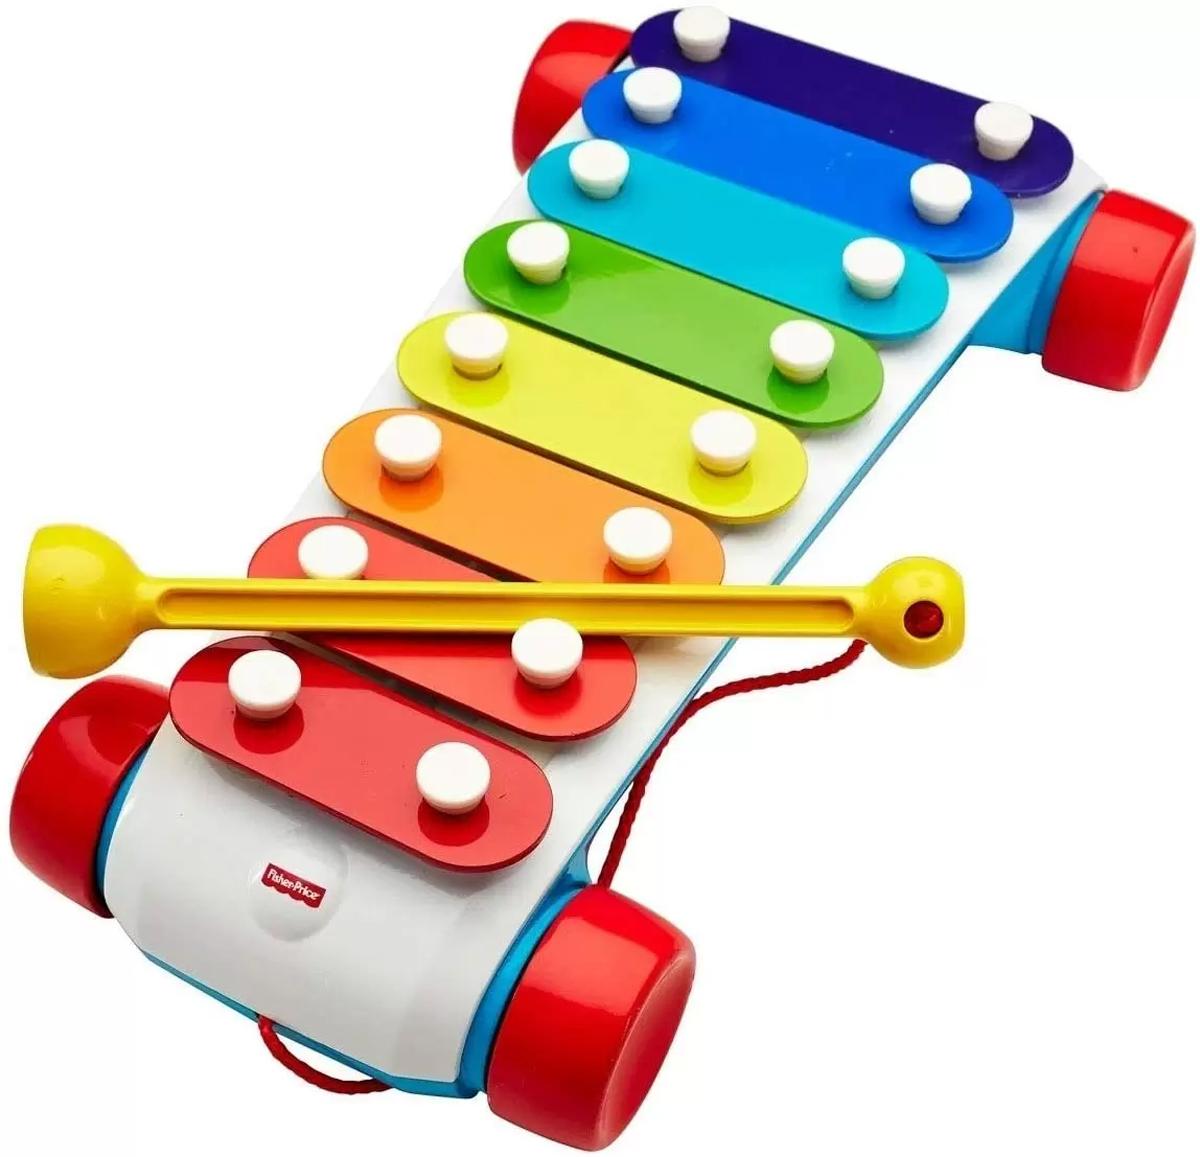 Fisher-Price Classic Xylophone for $6